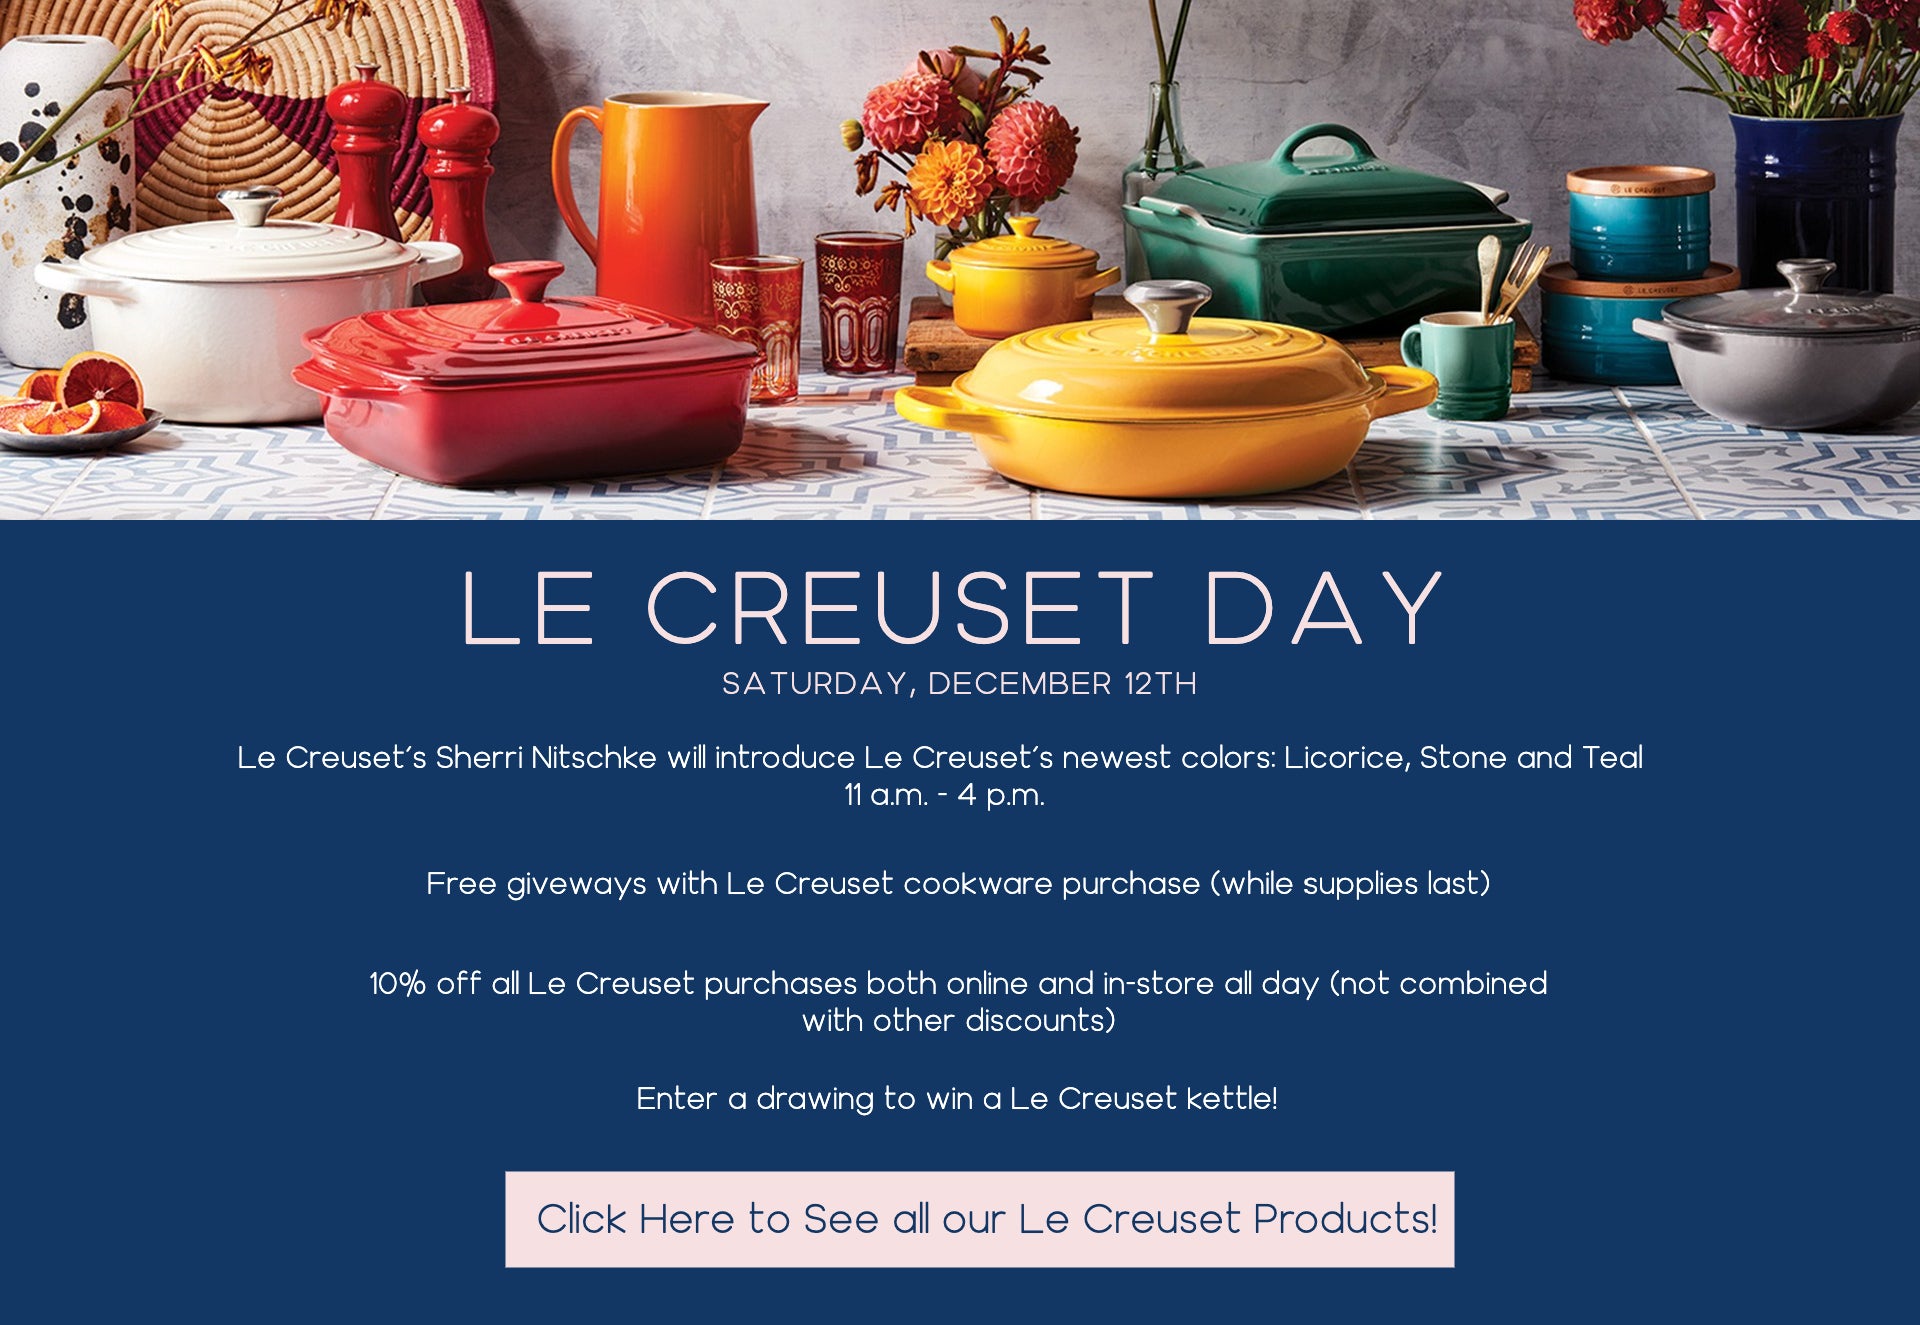 Le Creuset Day 2020